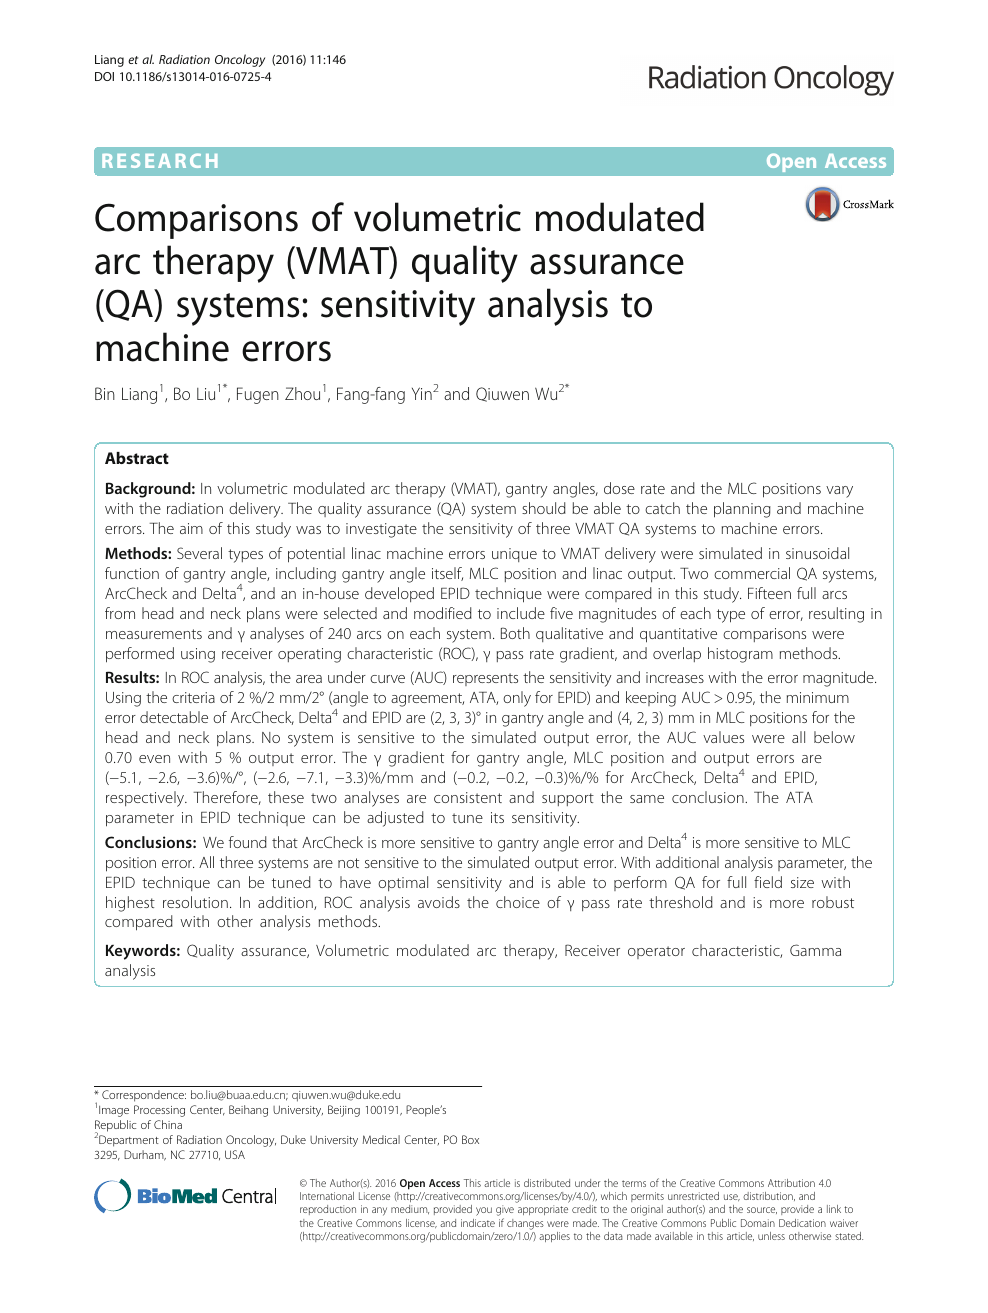 Comparisons Of Volumetric Modulated Arc Therapy Vmat Quality